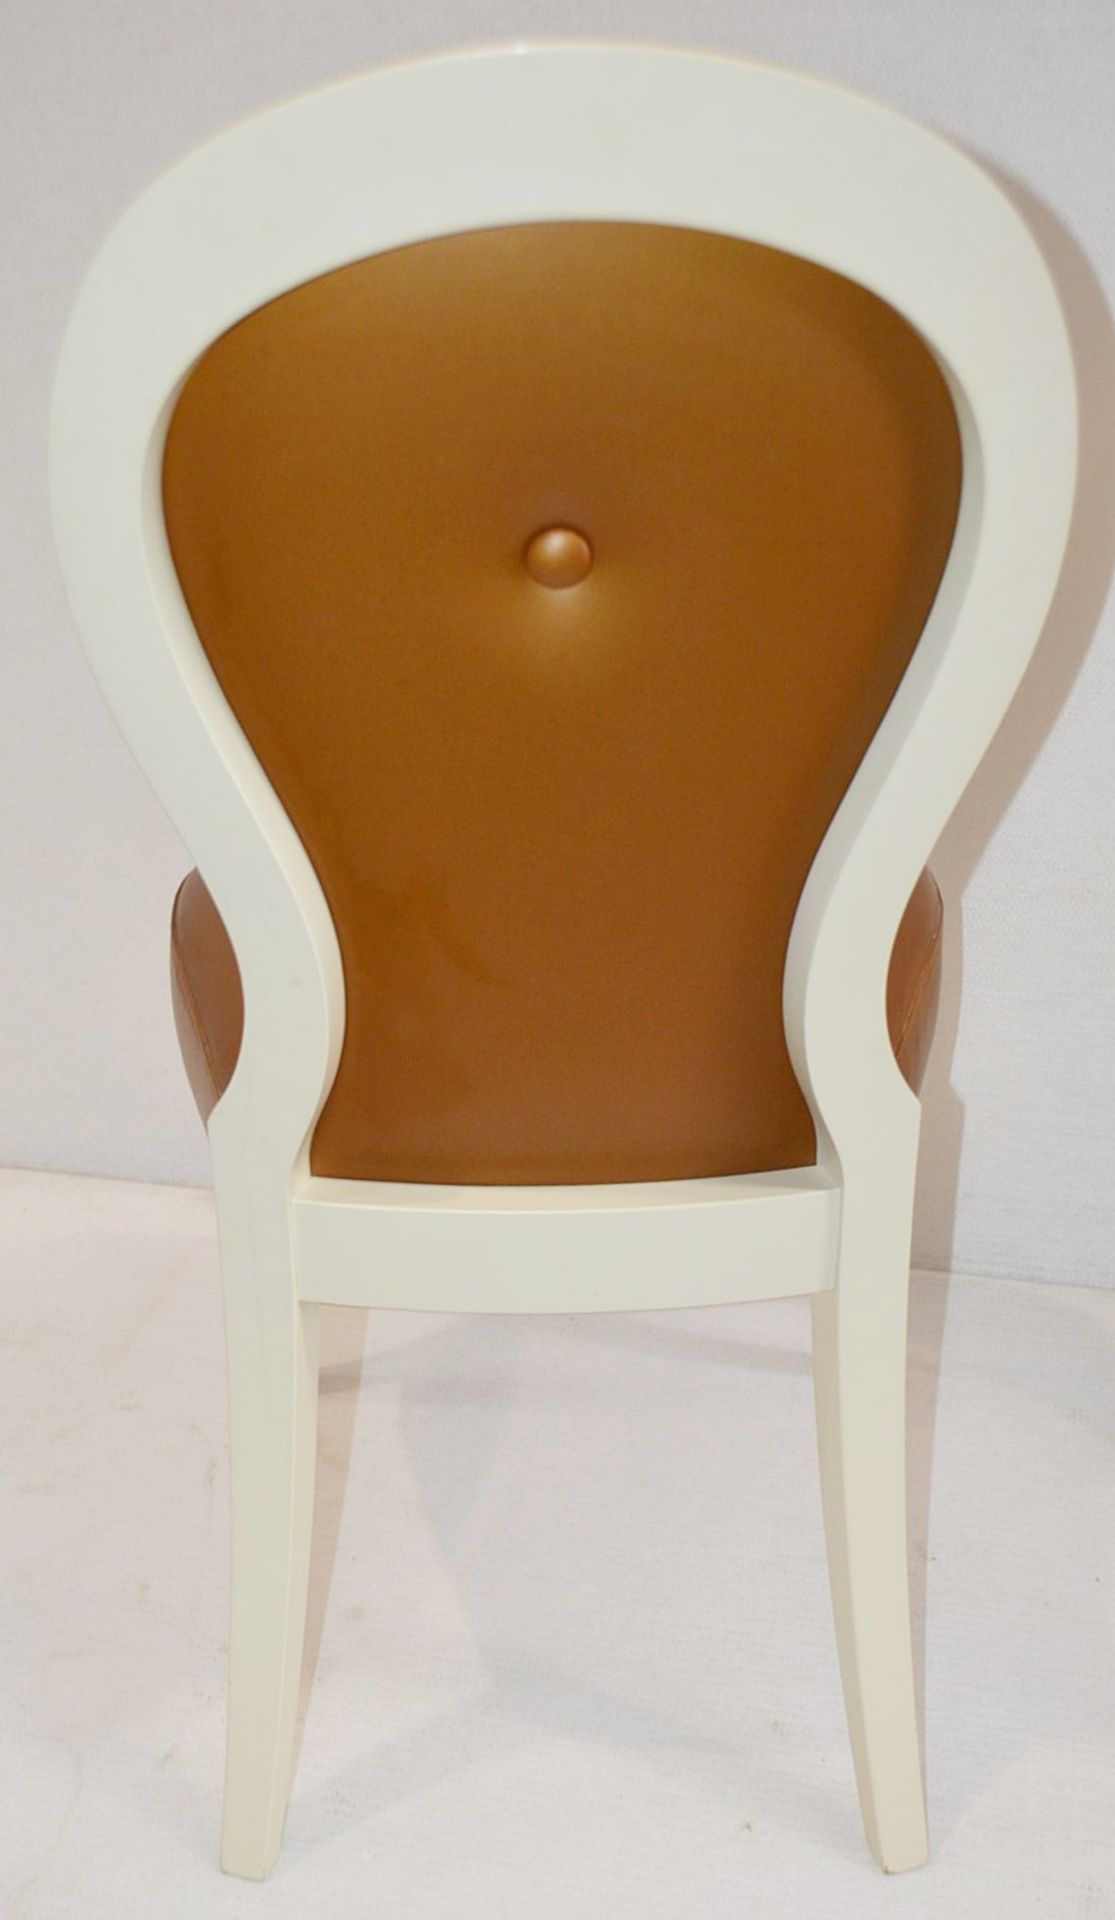 1 x Cushion Backed Chair With Curved Legs - Dimensions: H100 x W49 x D50cm / Seat 48cm - Ref: HMS128 - Image 4 of 4